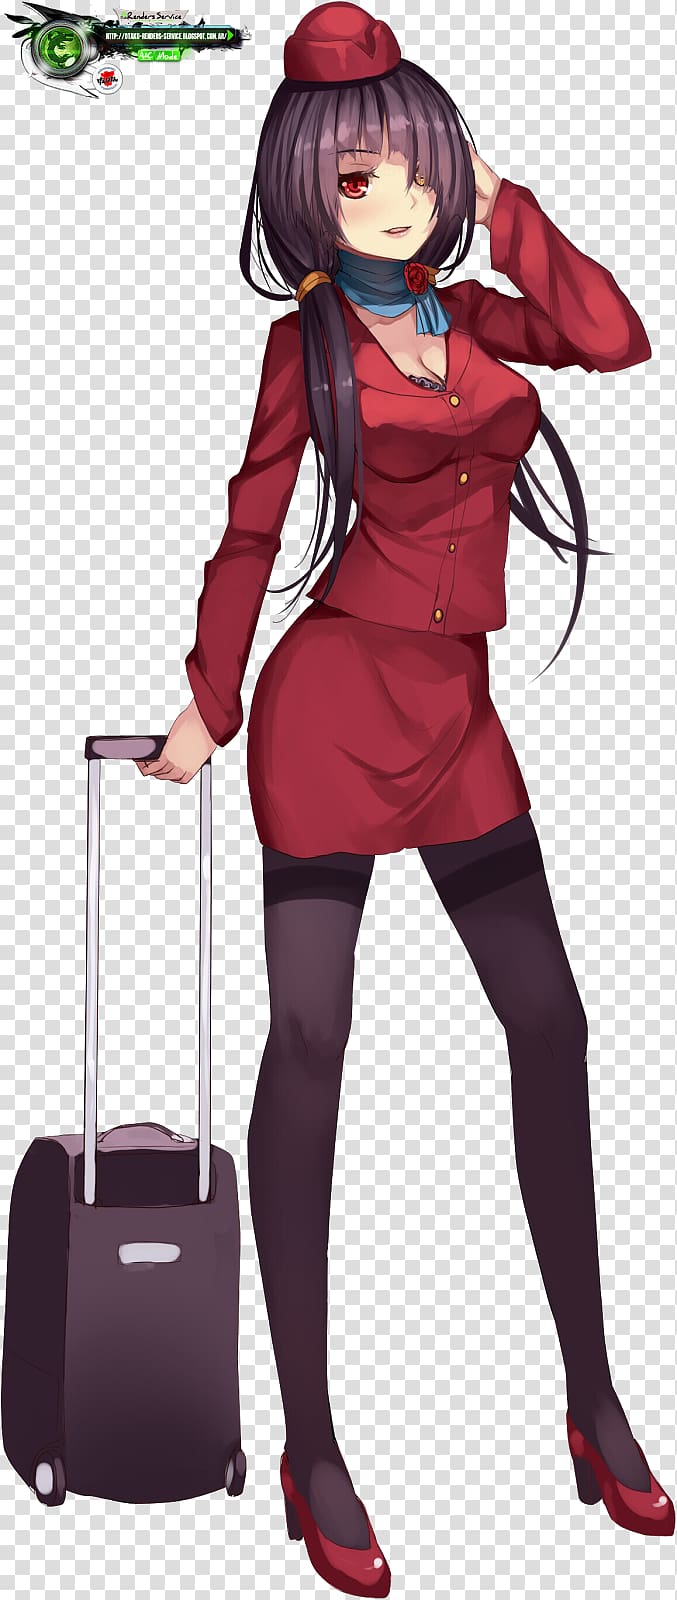 Date A Live Anime Flight attendant Manga, Anime transparent background PNG clipart